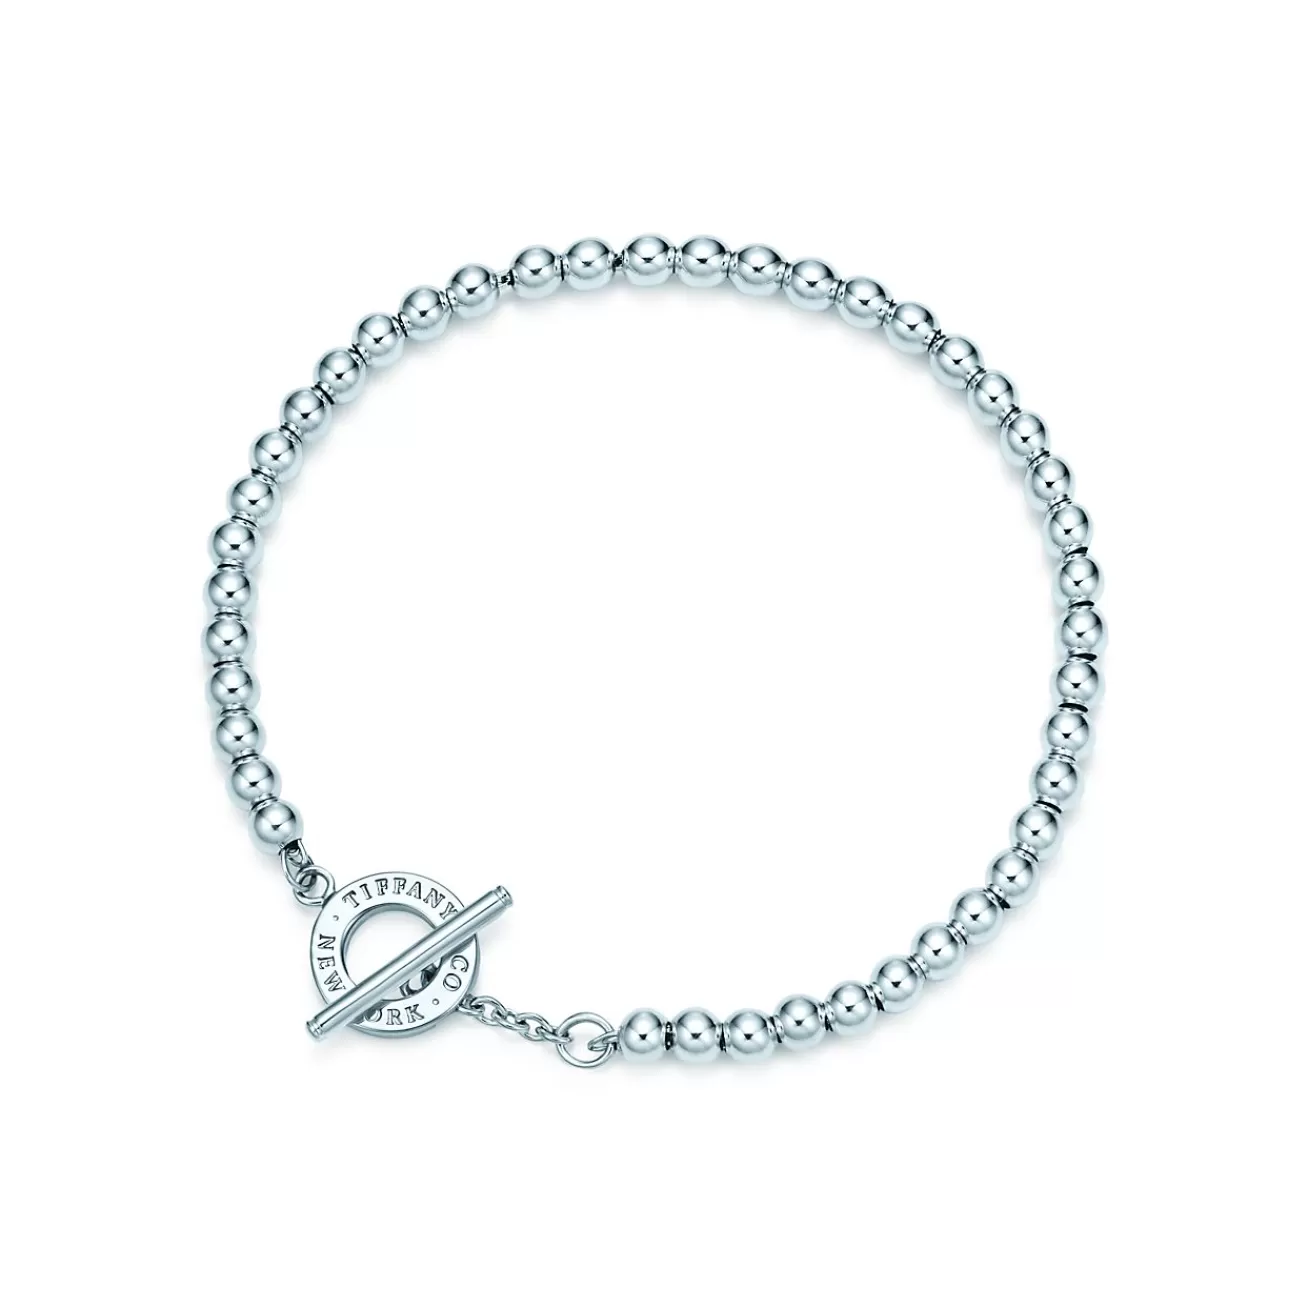 Tiffany & Co. Toggle Bead Bracelet in Sterling Silver, 4 mm | ^ Bracelets | Sterling Silver Jewelry